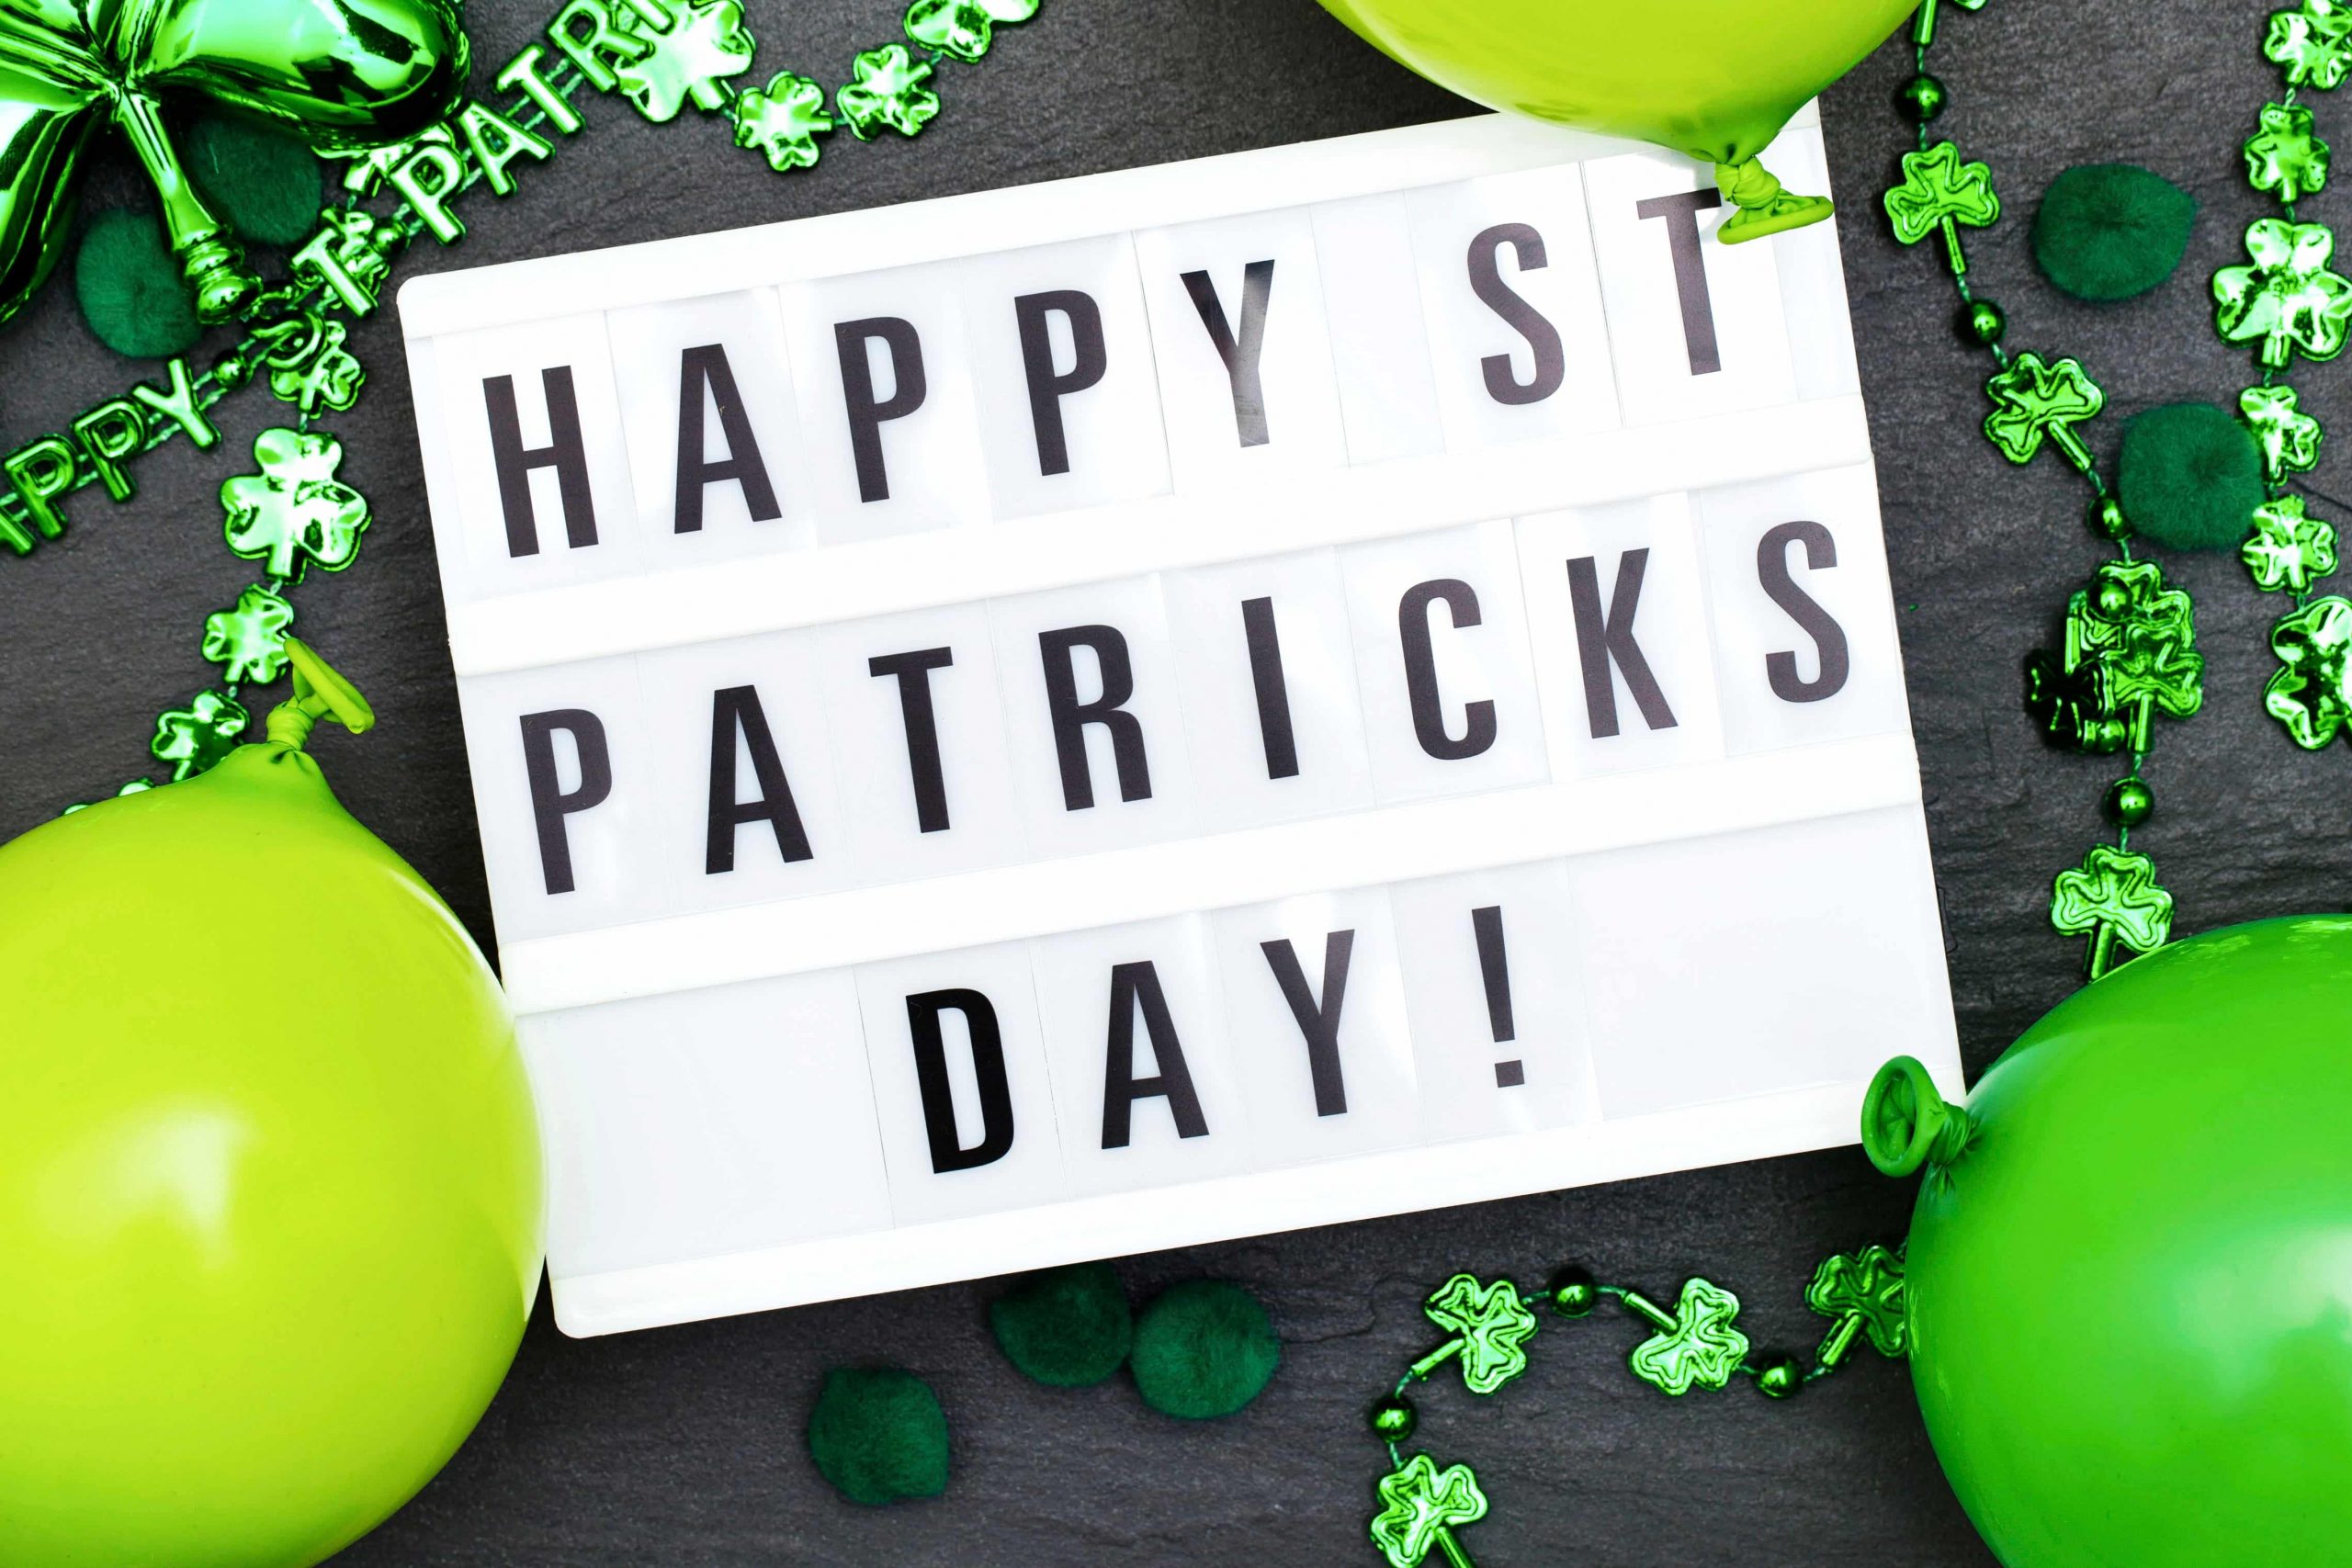 Commercial photography for St. Patrick’s Day, lightbox sign surrounded by green decorations.